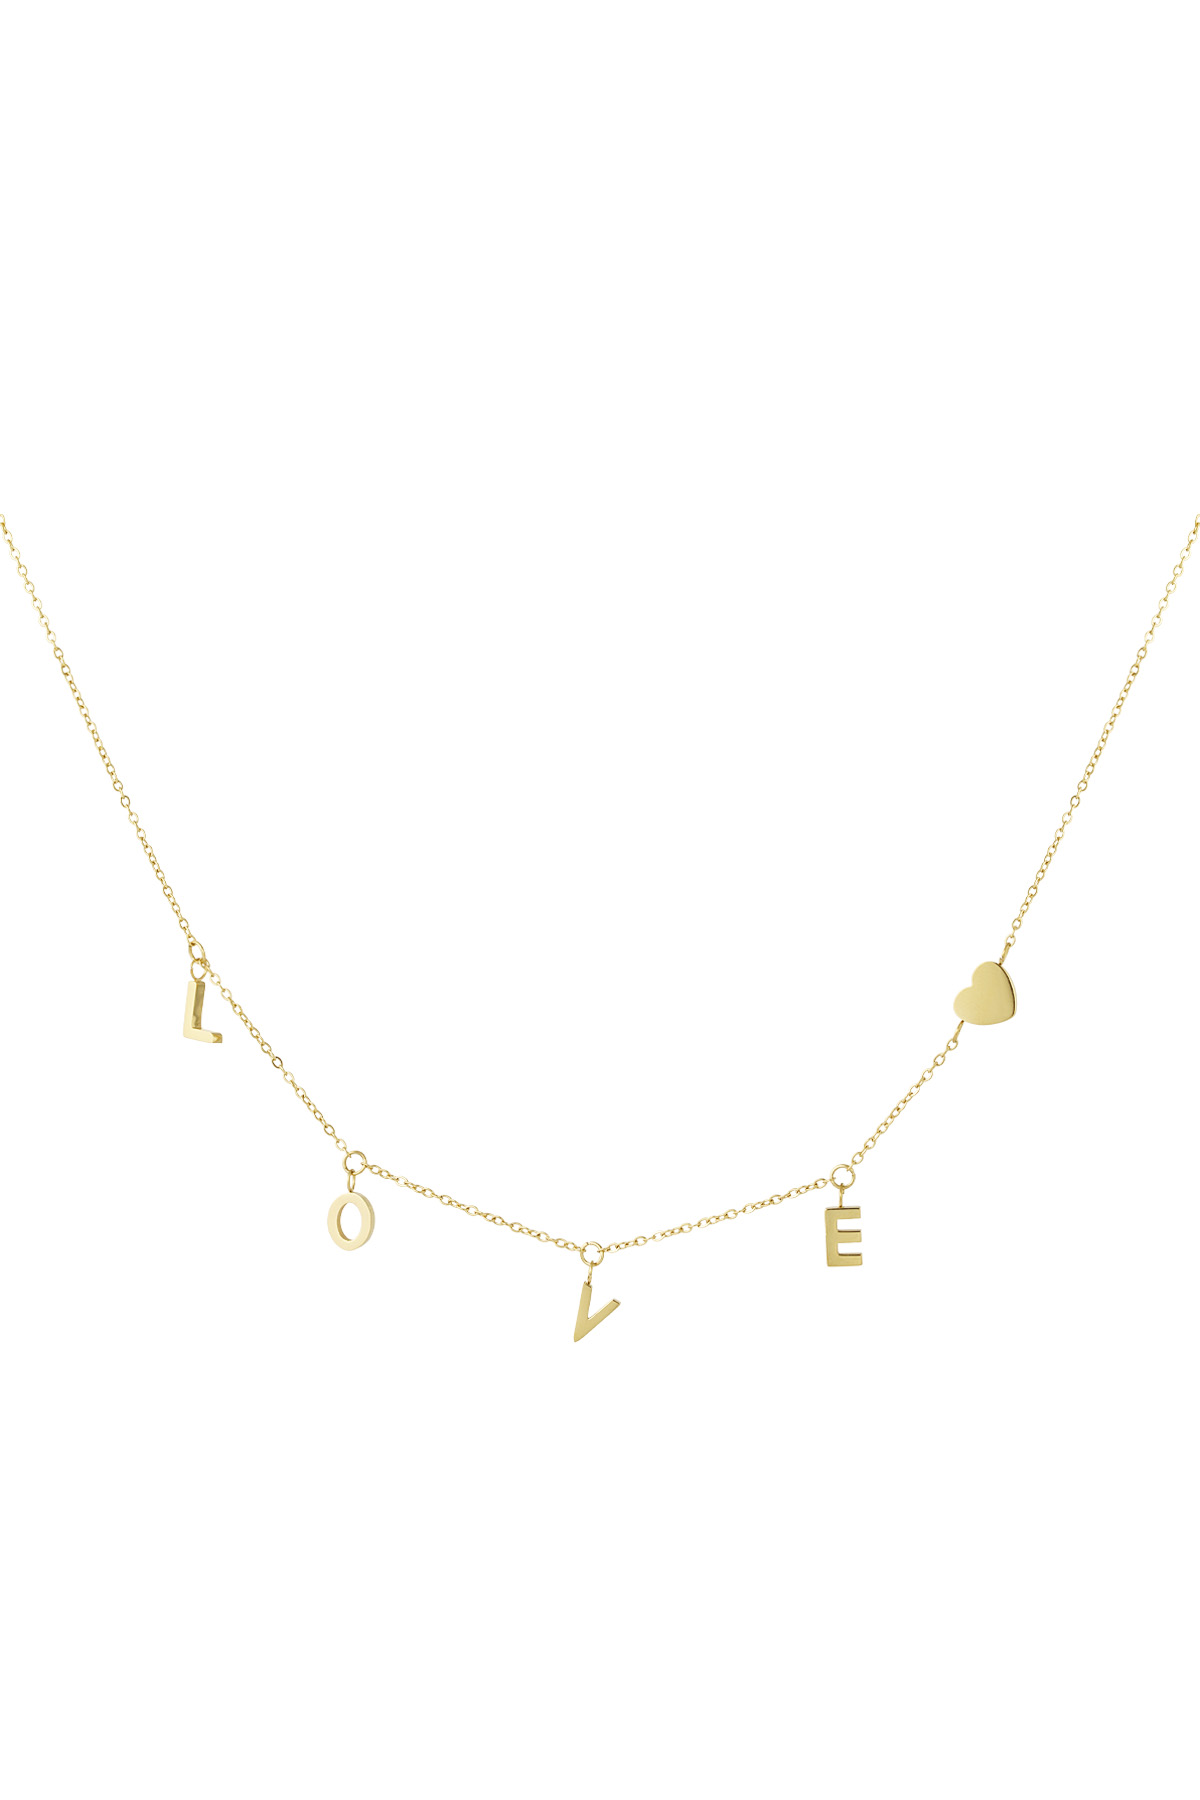 Necklace lover world - gold